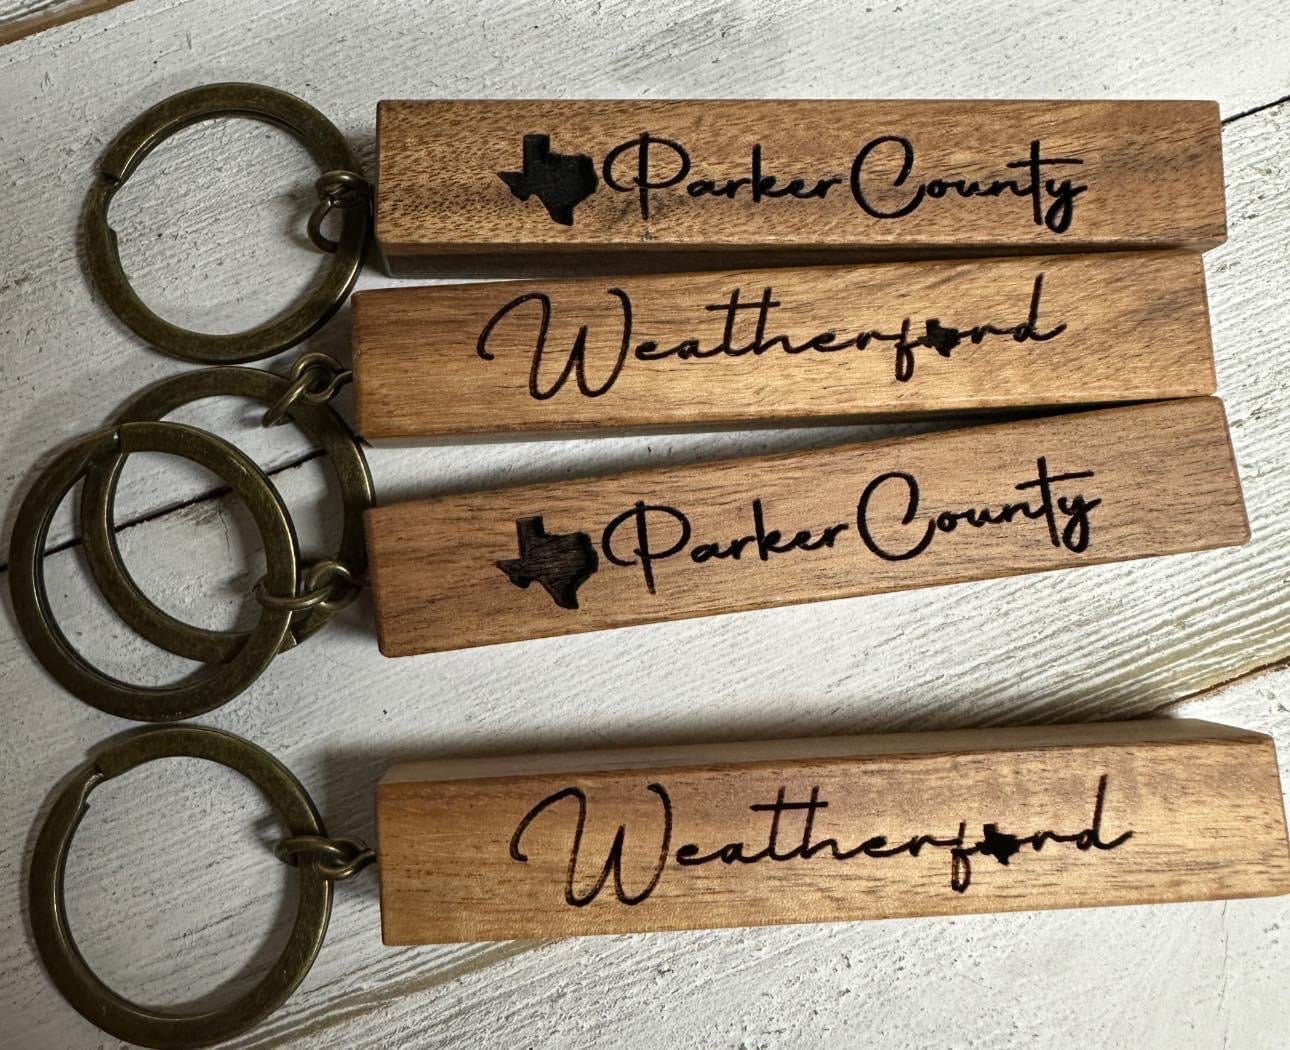 Parker County KeyChain